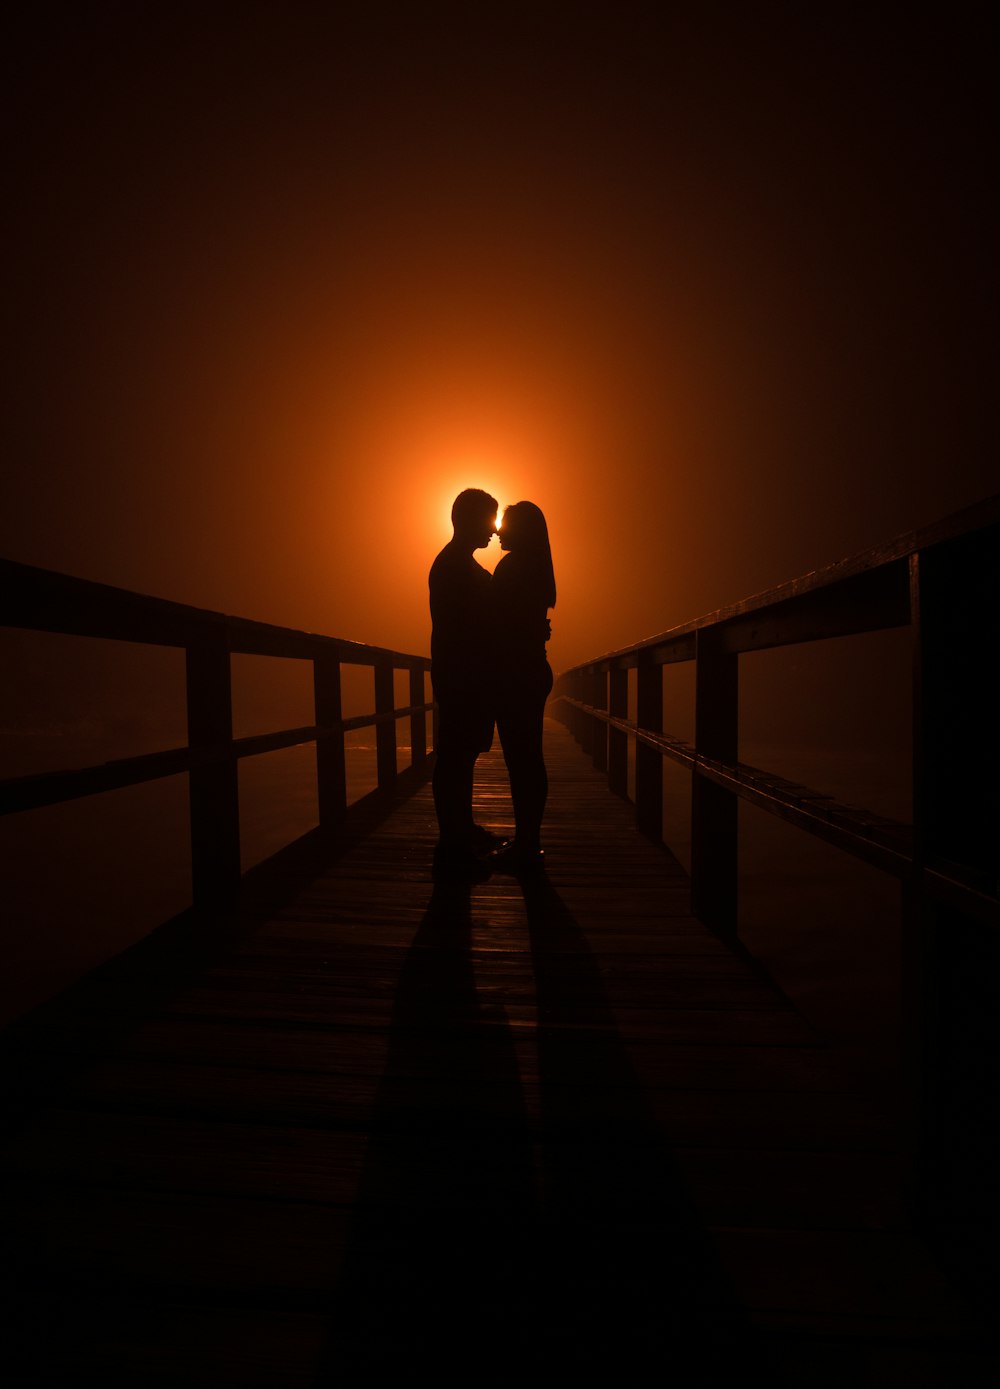 silhouette of man and woman standing on dock during susnet